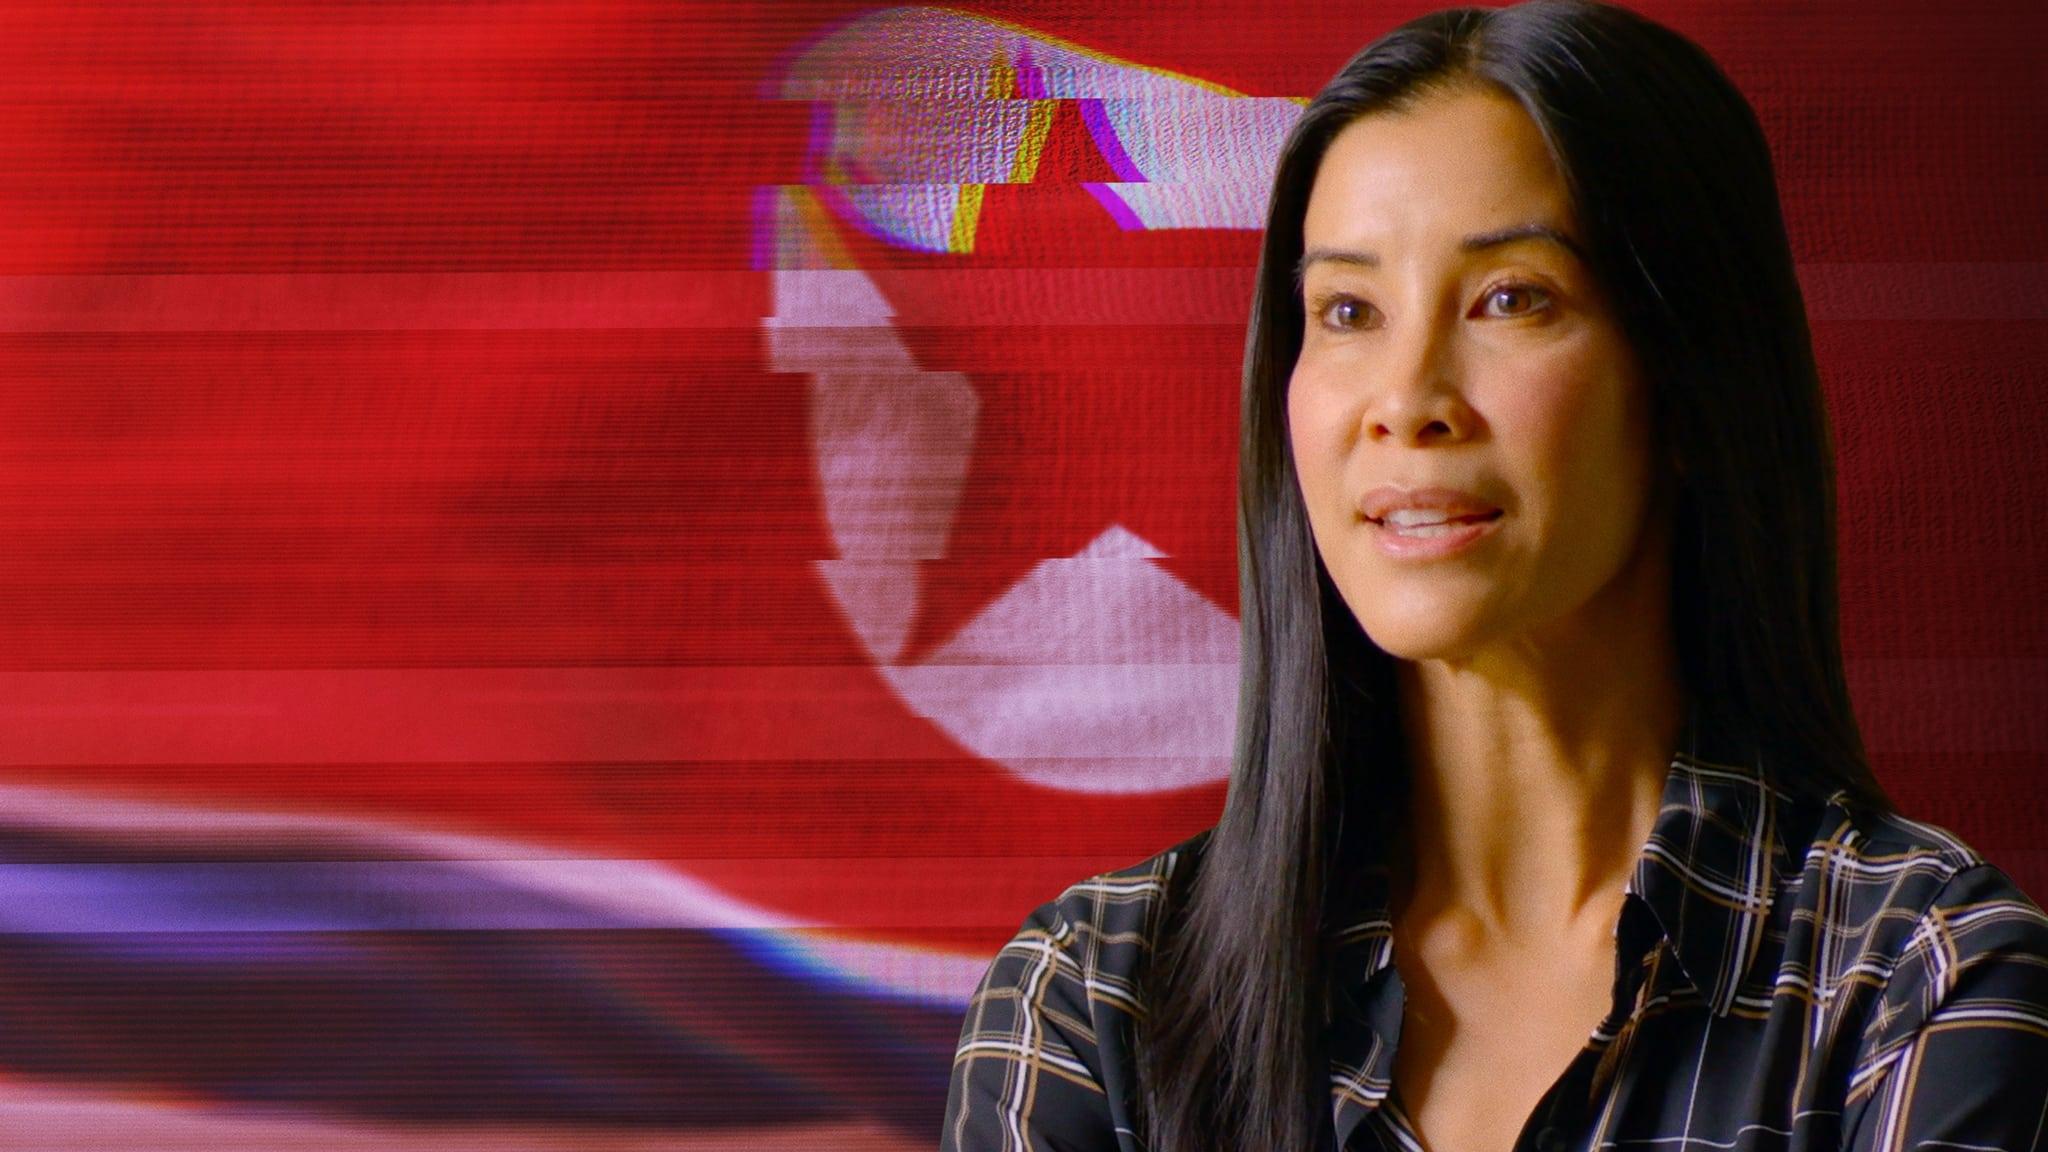 Inside North Korea: Then and Now with Lisa Ling backdrop